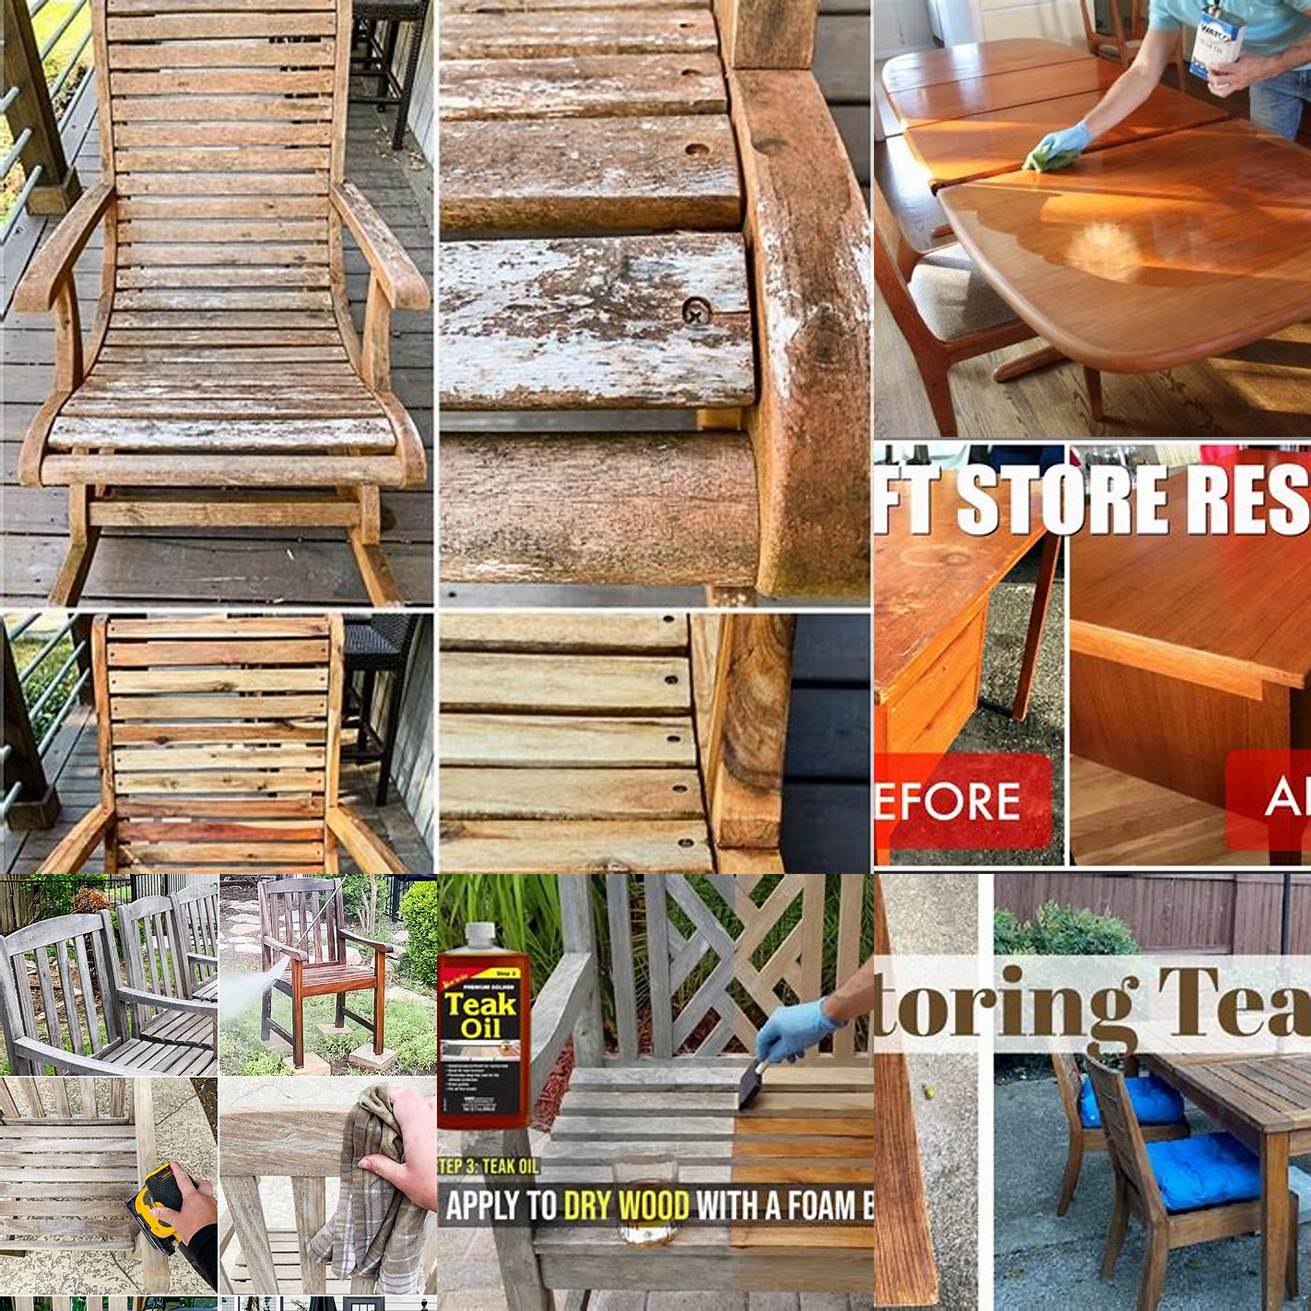 Step-by-Step Photos of a Teak Furniture Restoration Project